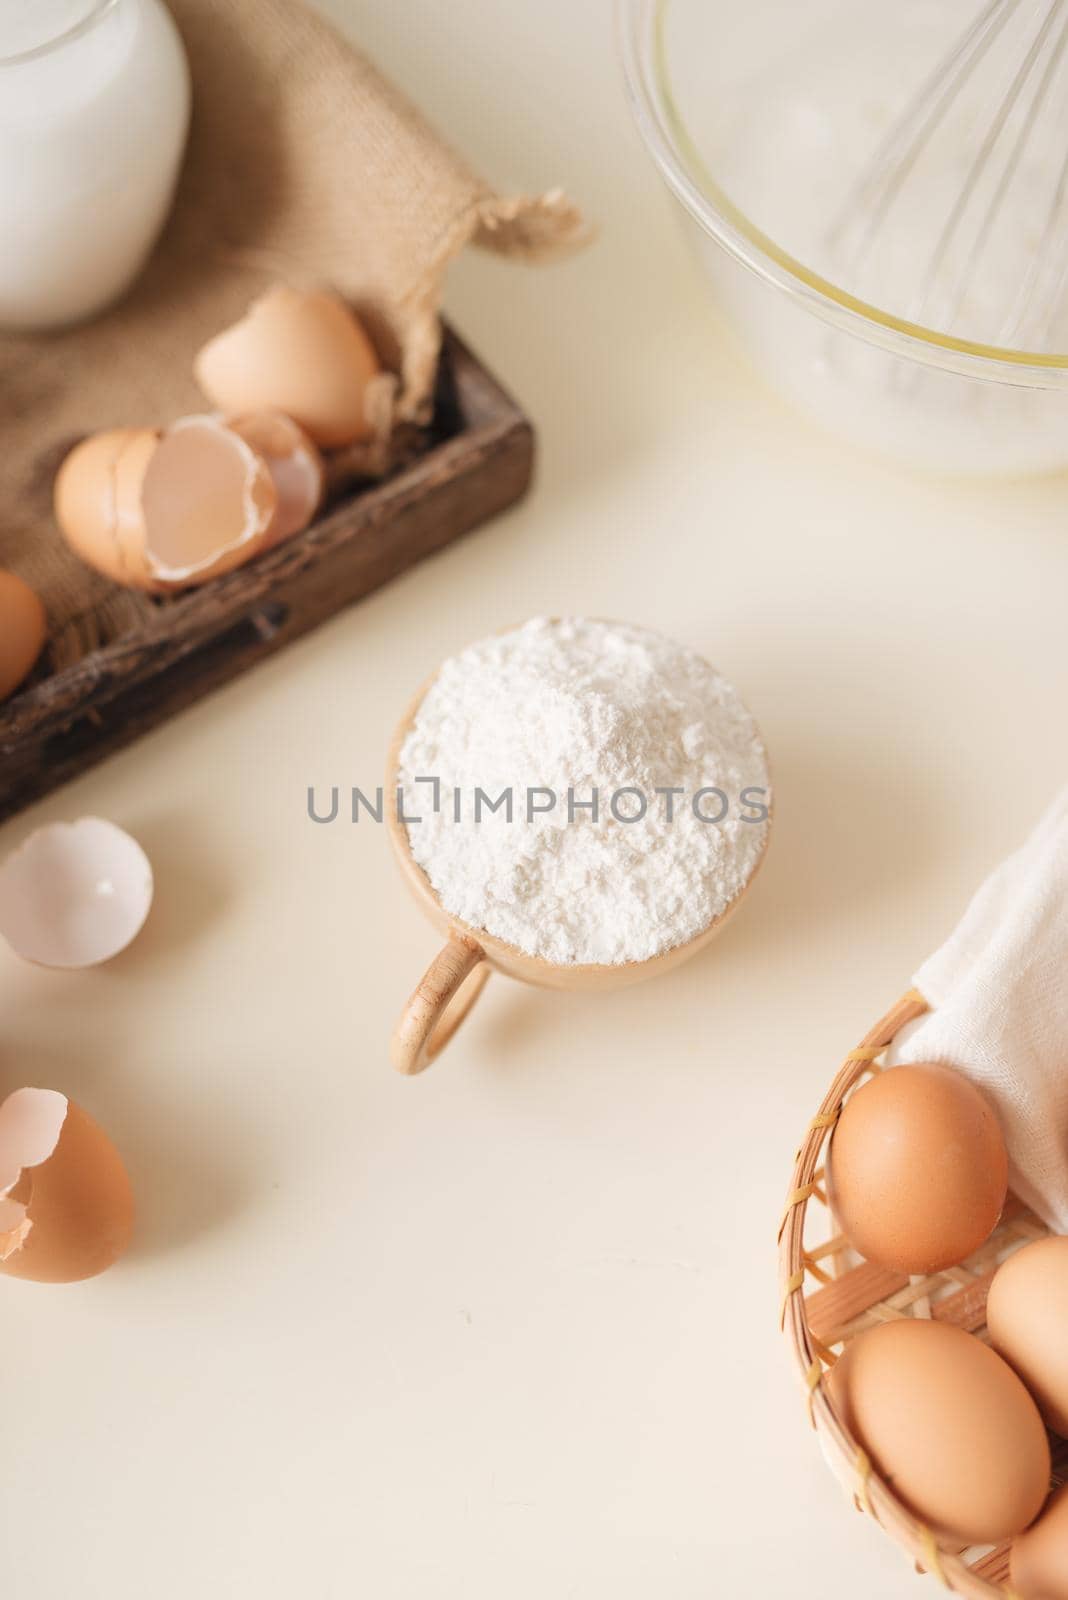 Young man's hands whisk eggs with sugar to bake fruit cake. Male cooking dough for pie on white table